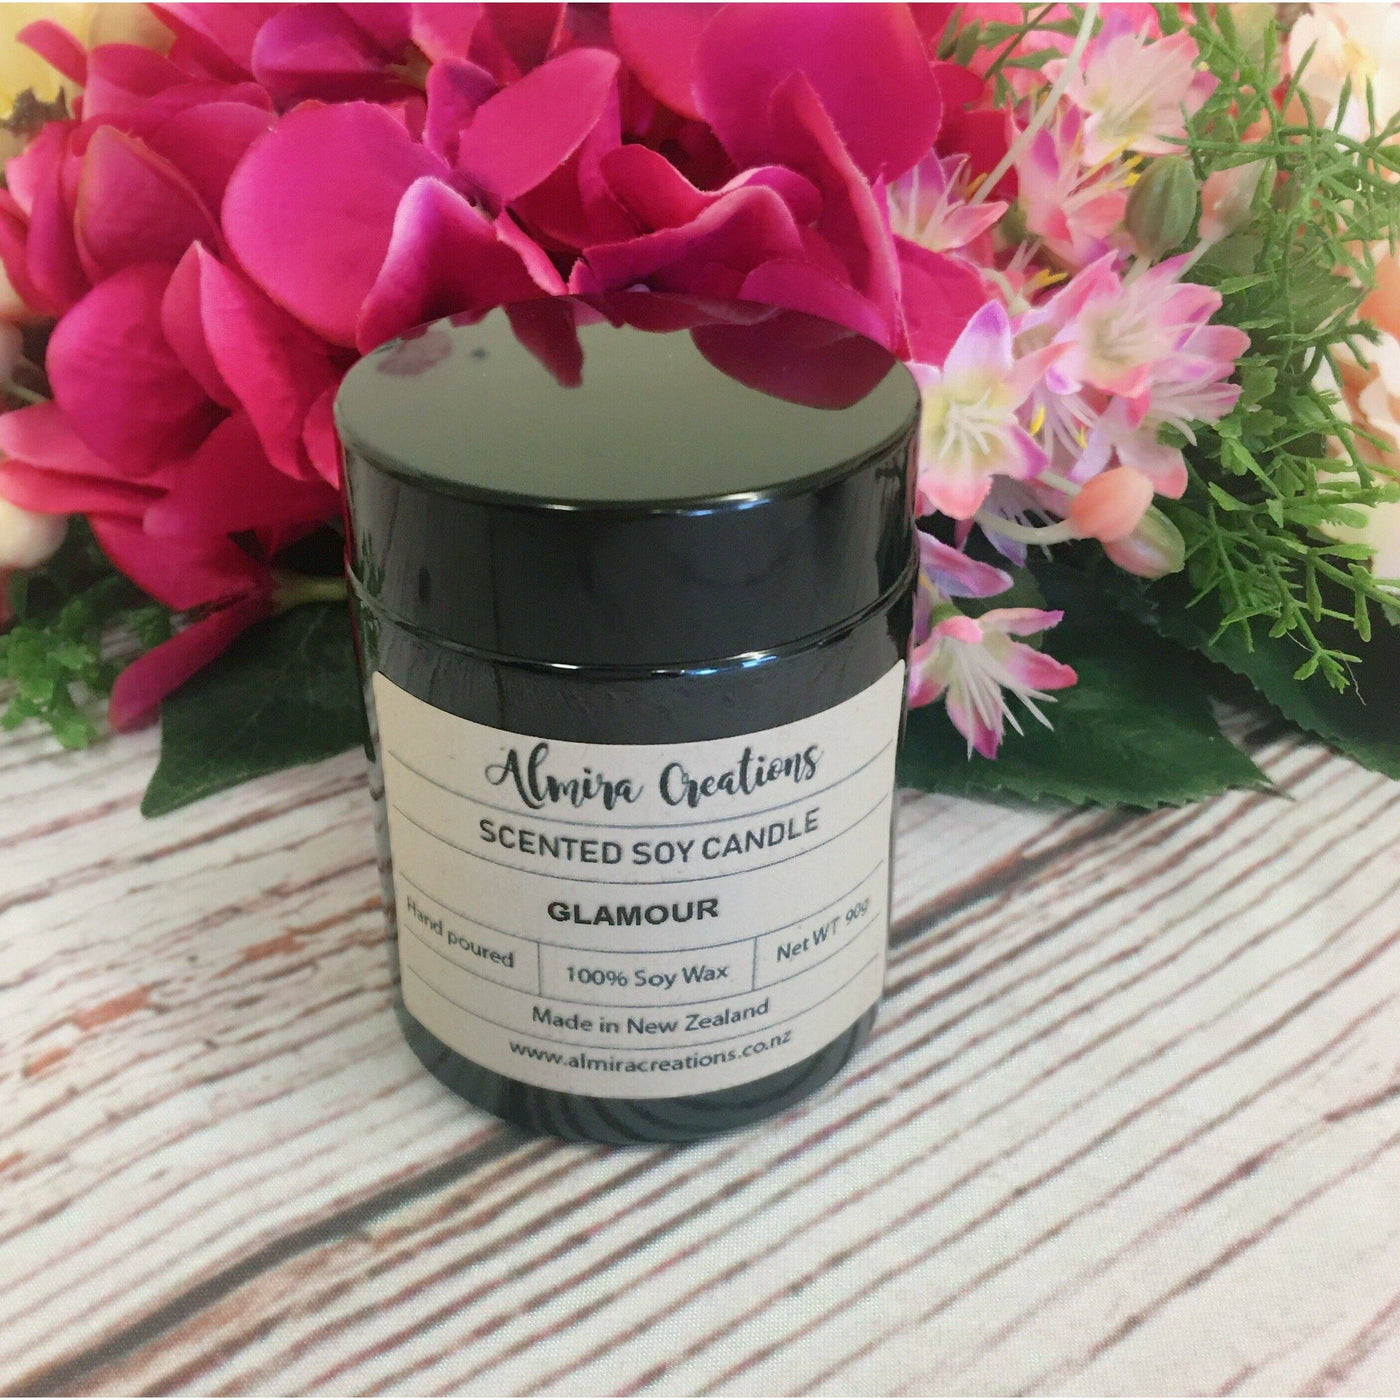 Glamour - Scented Soy Candle - Almira Creations